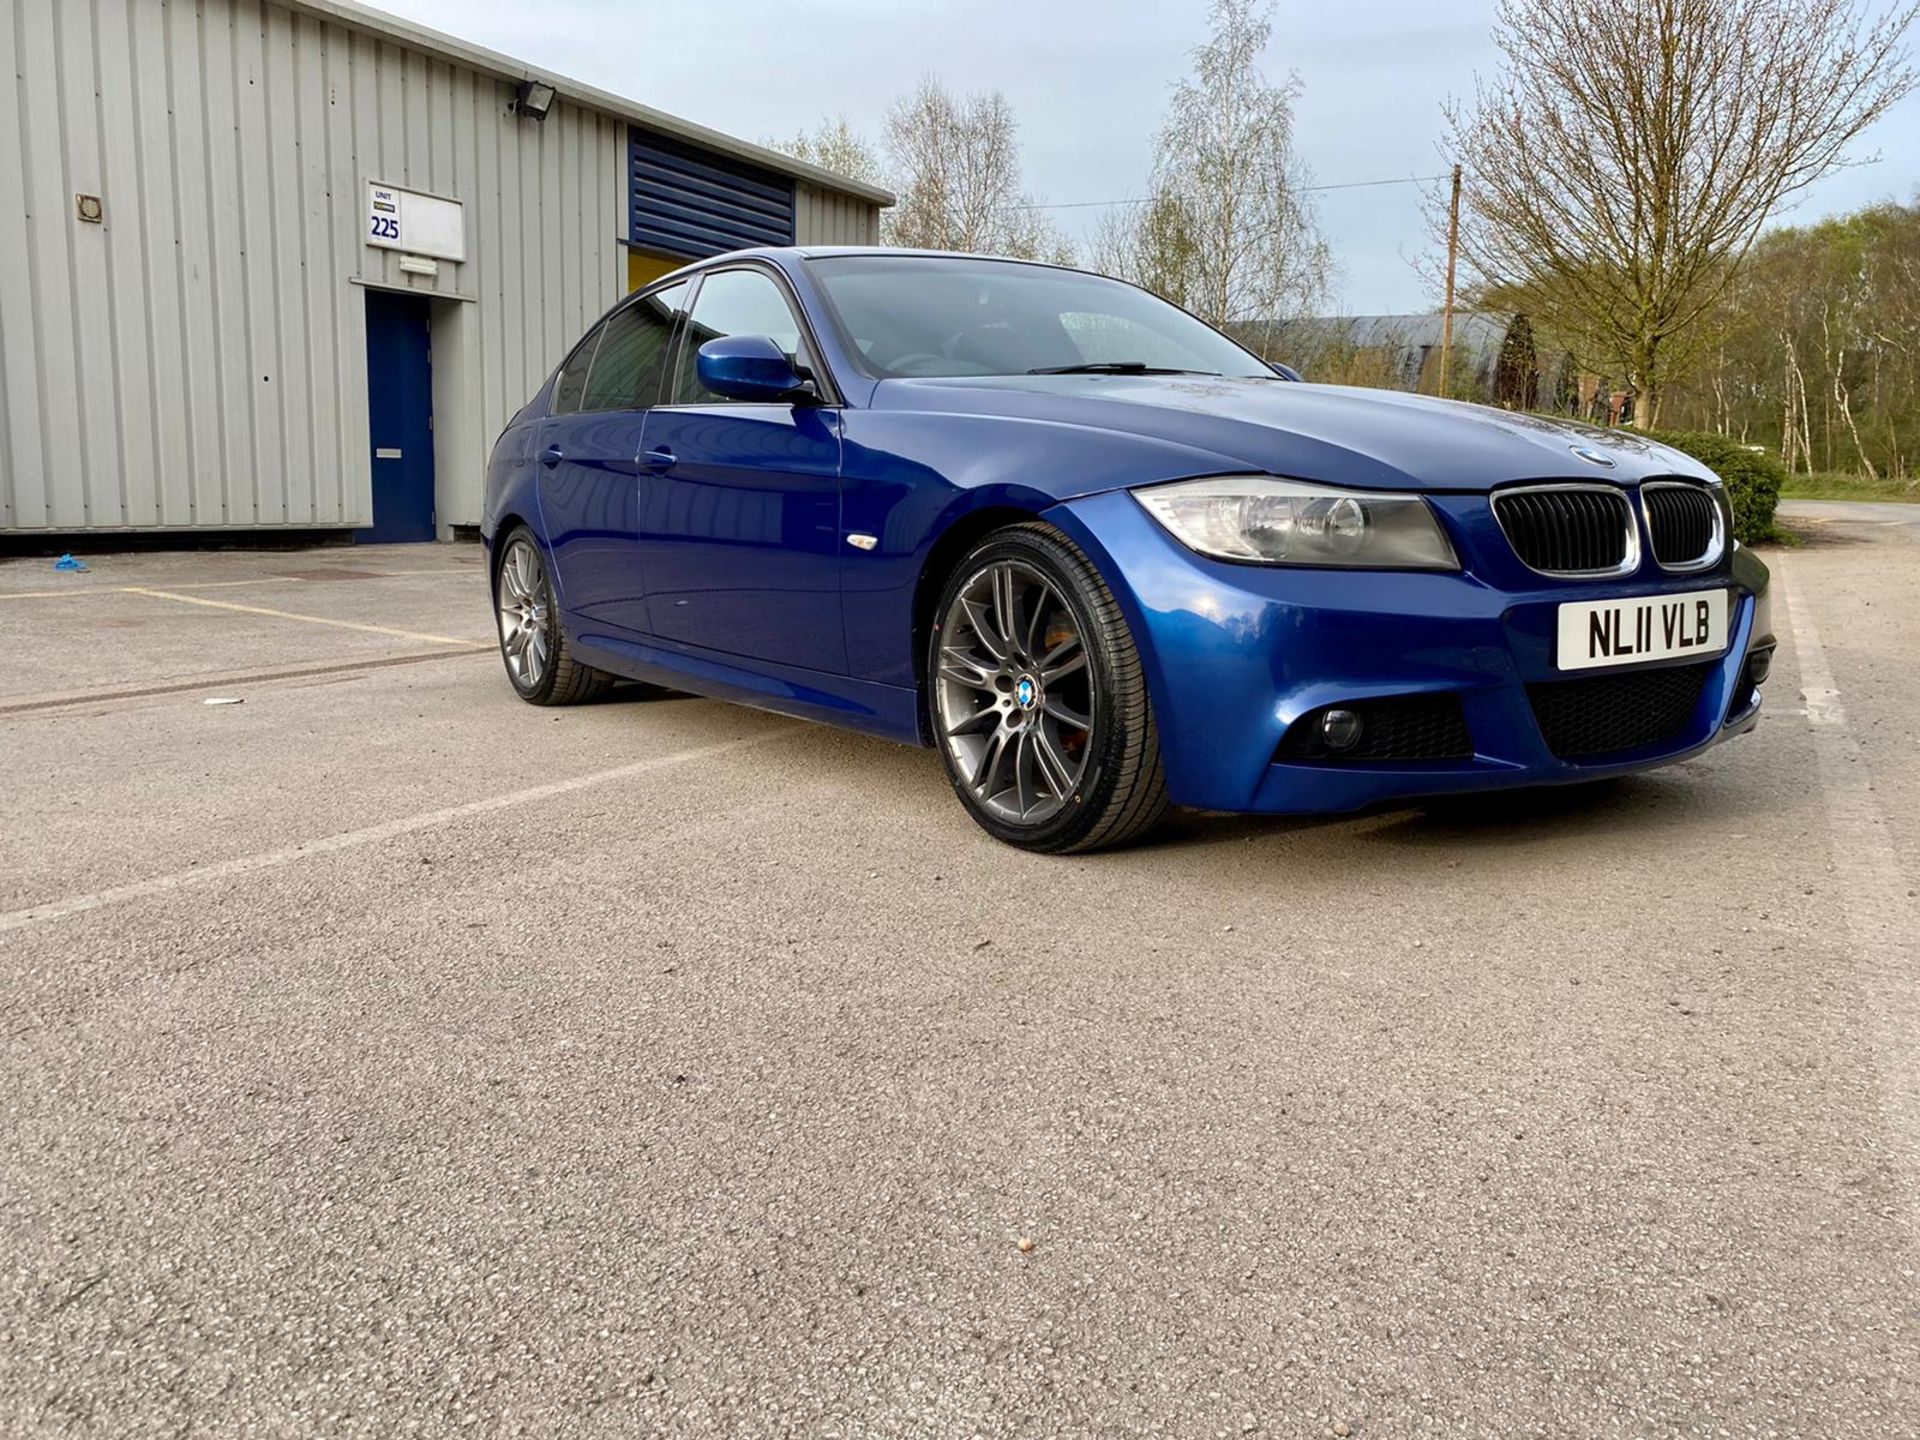 2011 BMW 318I SPORT PLUS EDITION BLUE SALOON, NEW TMING CHAIN, NEW 2 PIECE CLUTCH KIT *NO VAT* - Image 2 of 5